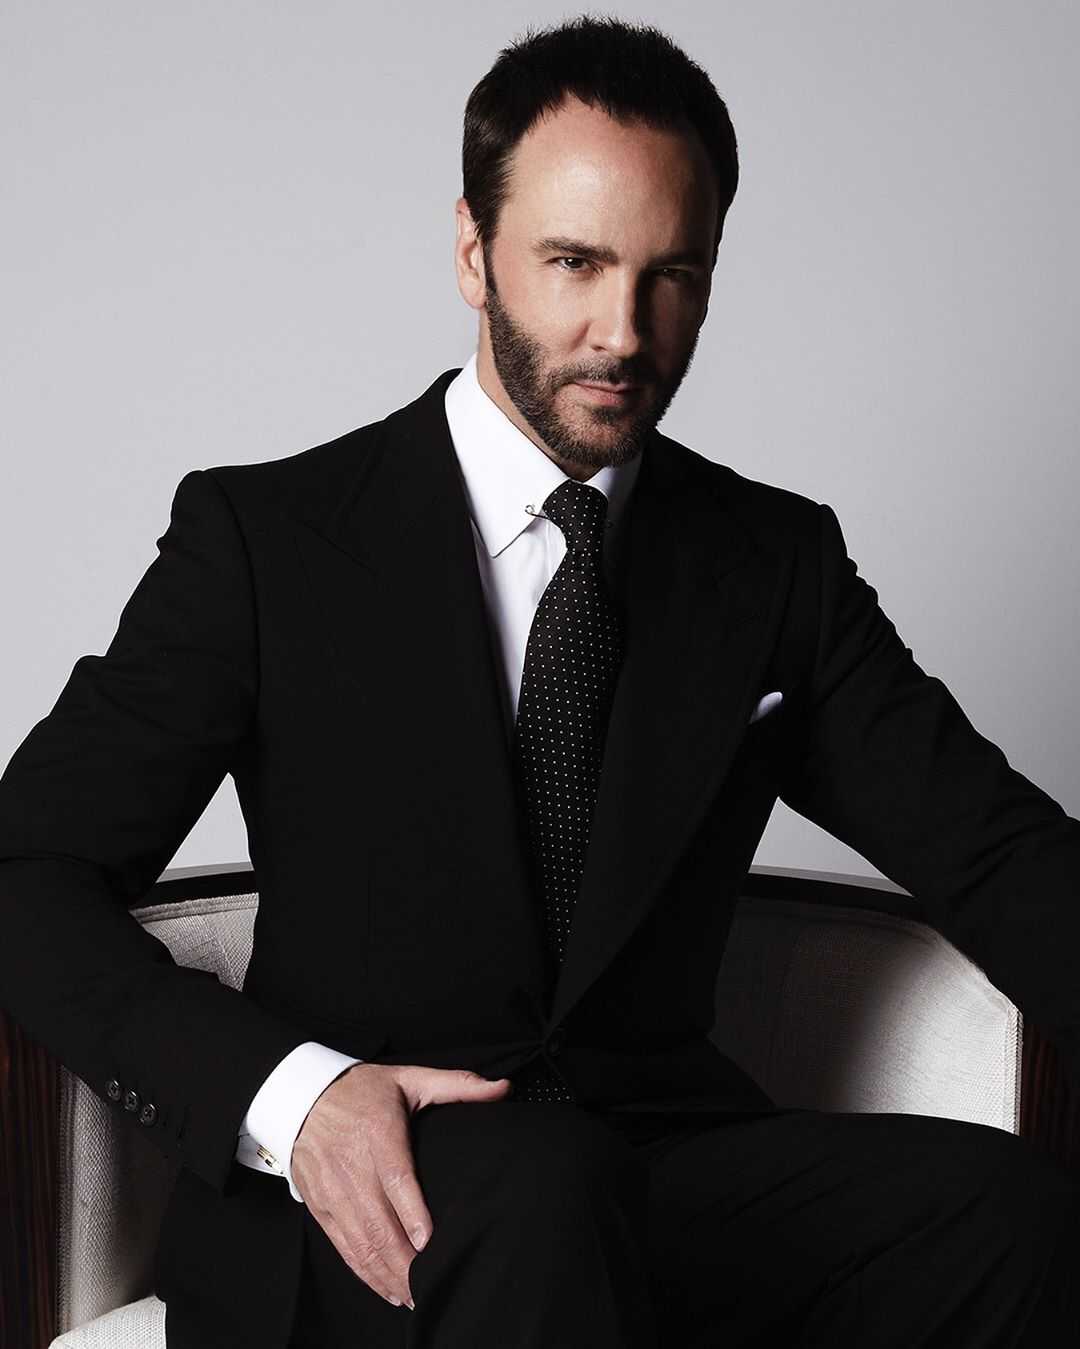 Tom Ford For Gucci: The Designer's Best Moments